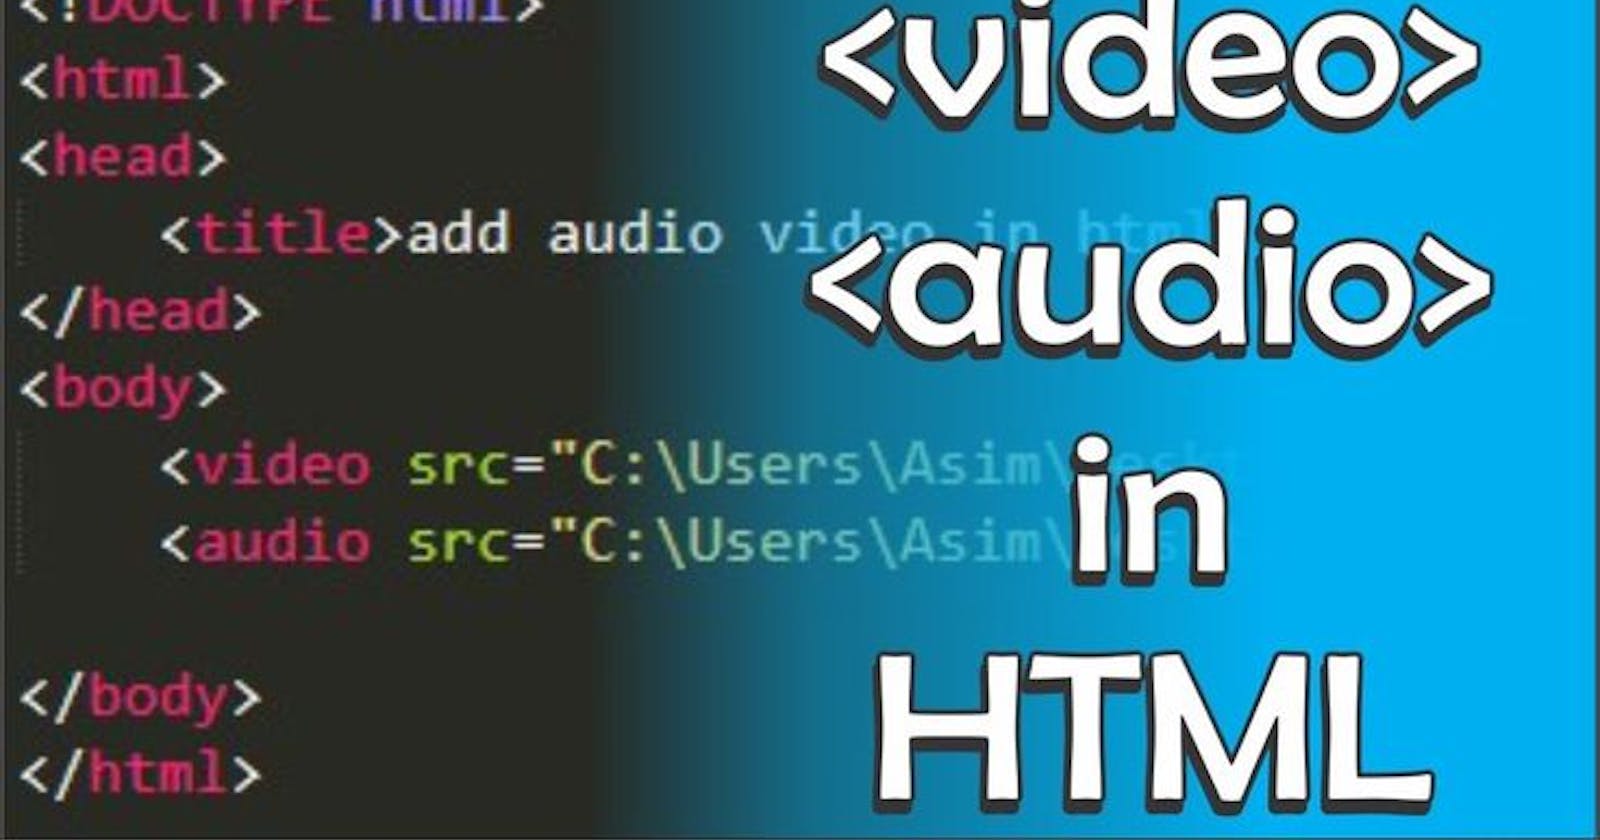 "Enhancing Web Content with HTML Audio and Video Tags: A Guide for Web Developers"